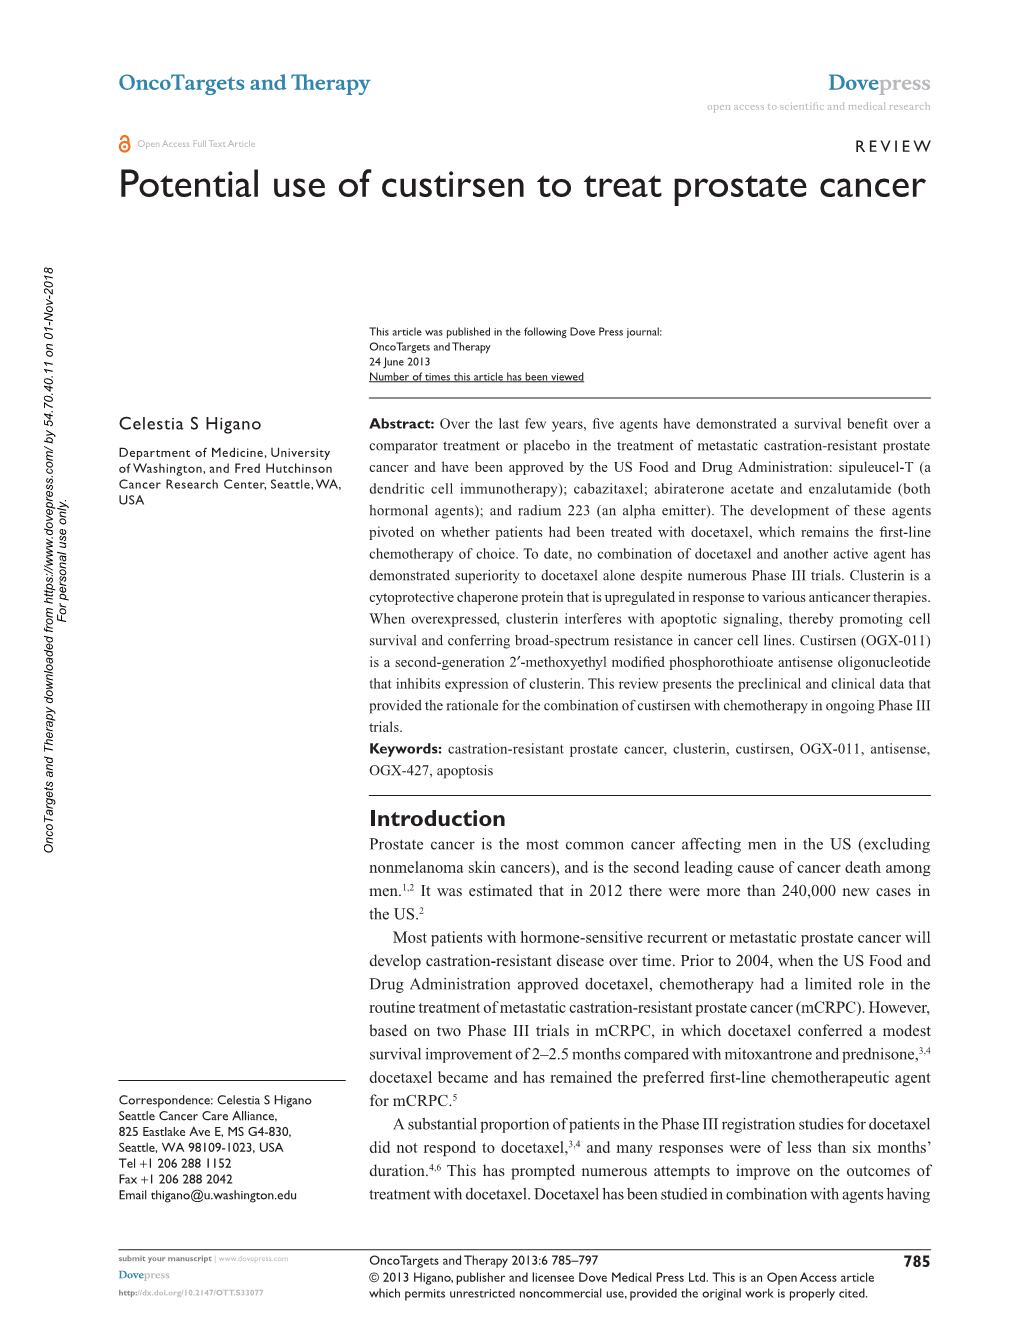 Potential Use of Custirsen to Treat Prostate Cancer